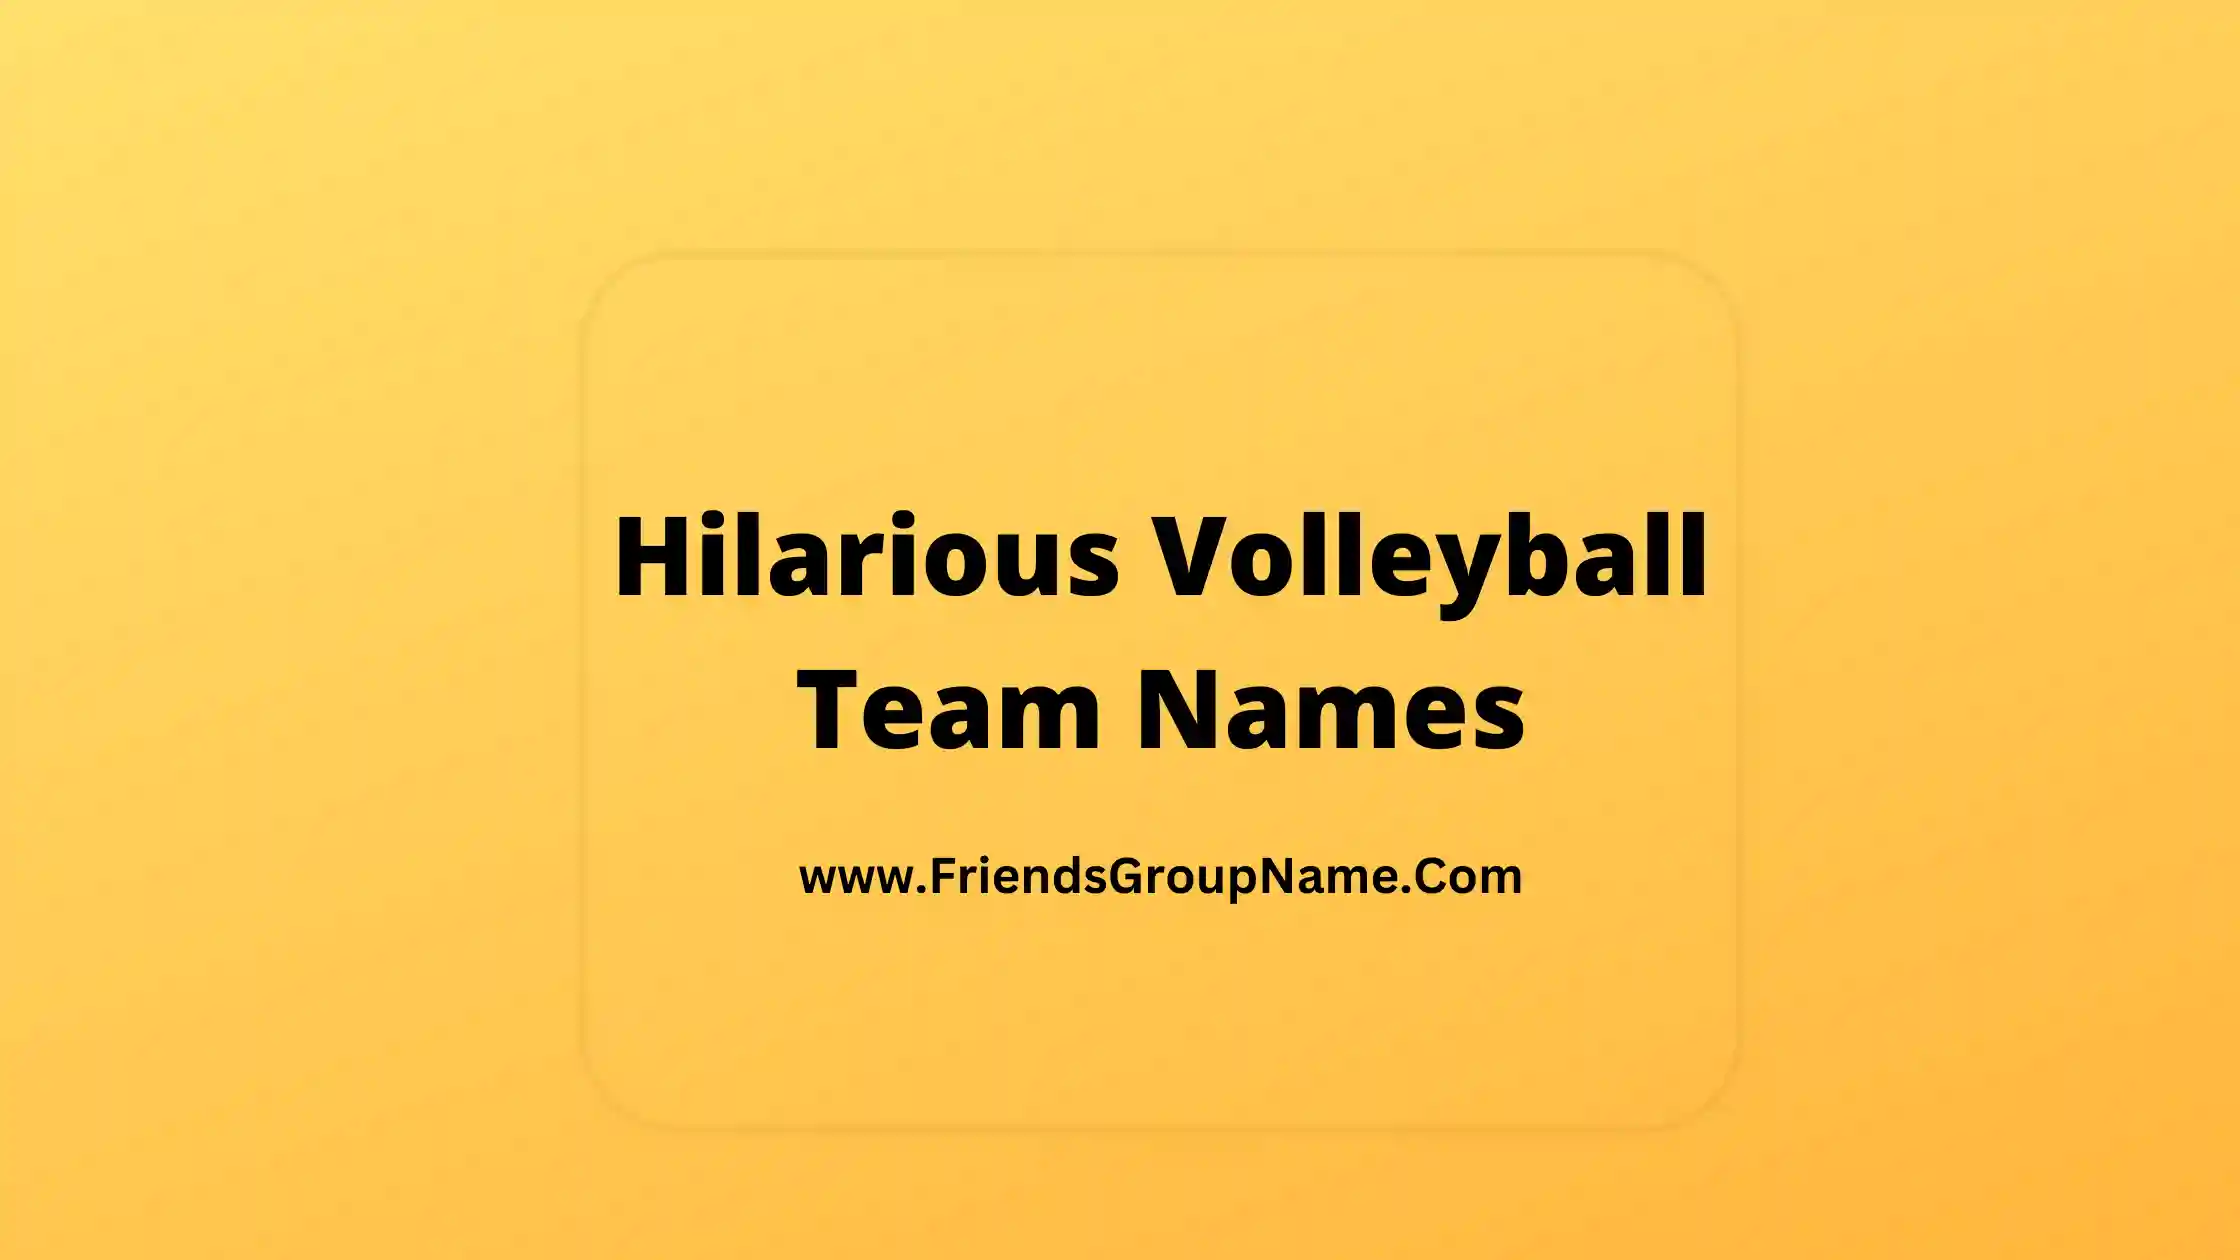 Hilarious Volleyball Team Names